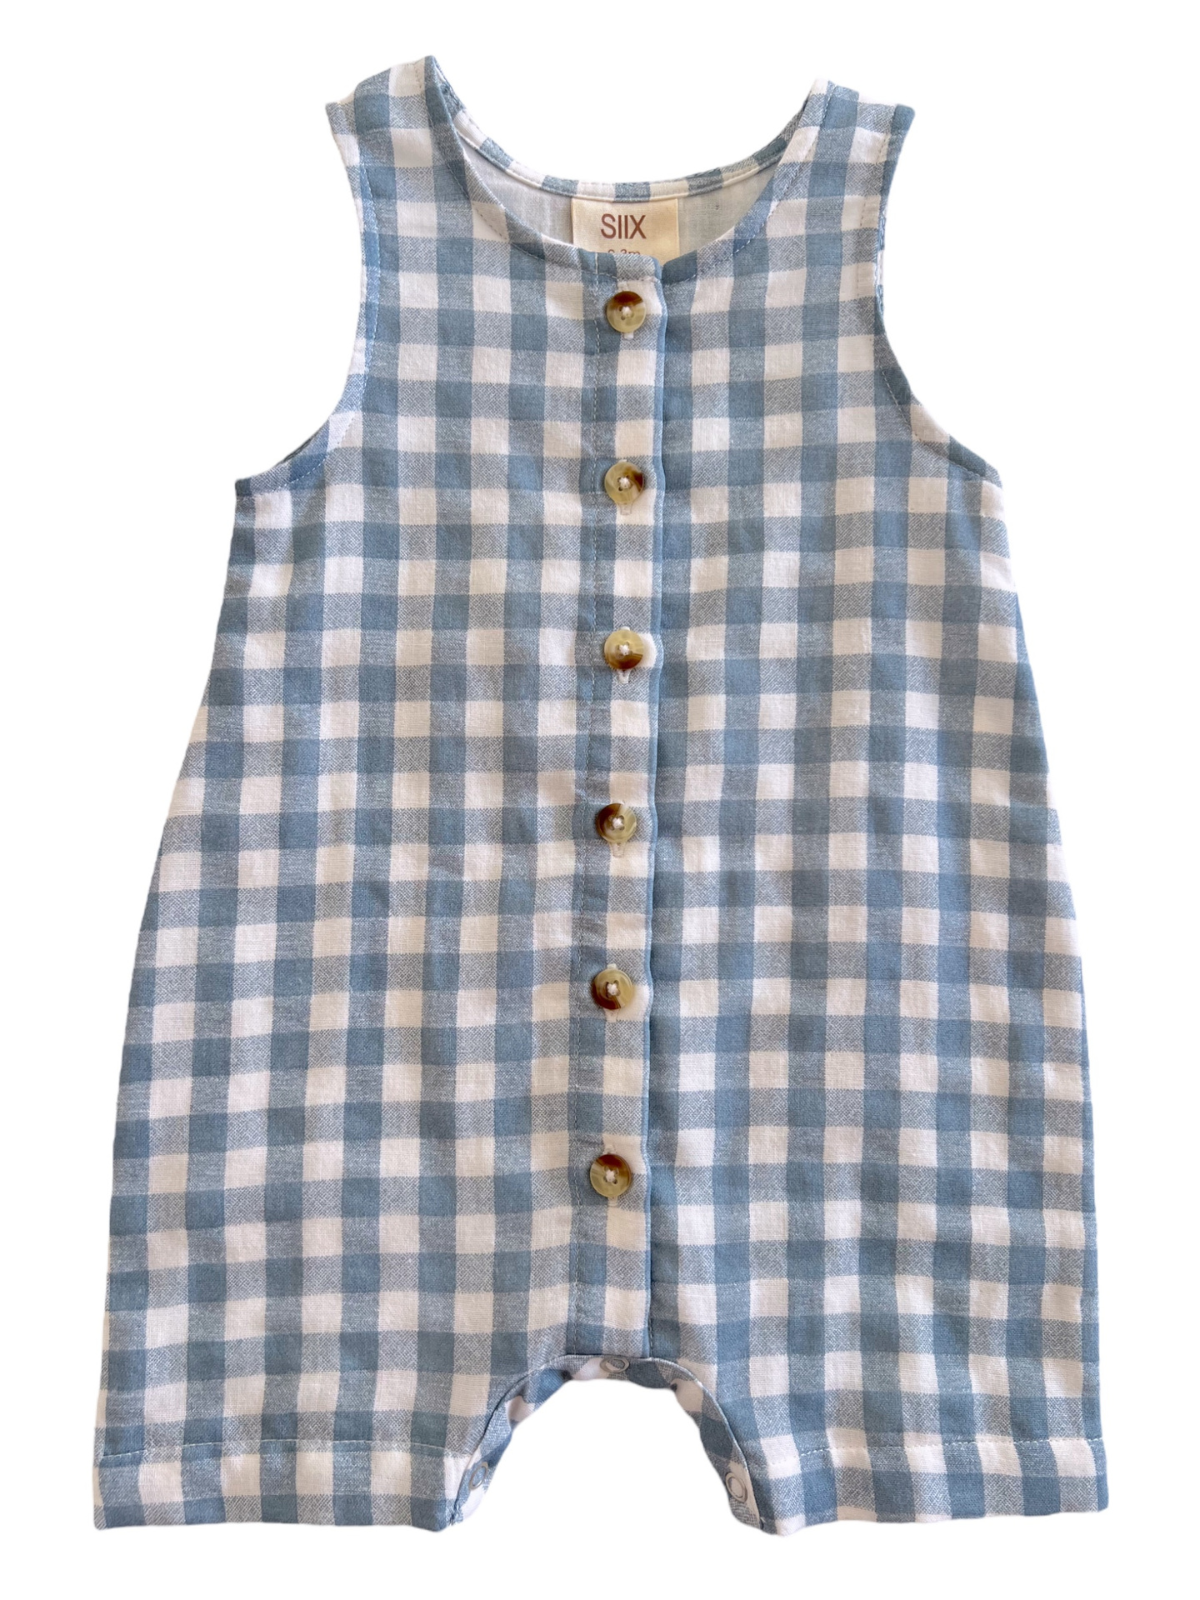 SIIX Collection Blue Gingham / Organic Bay Shortie (Baby - Kids) - Simple Good